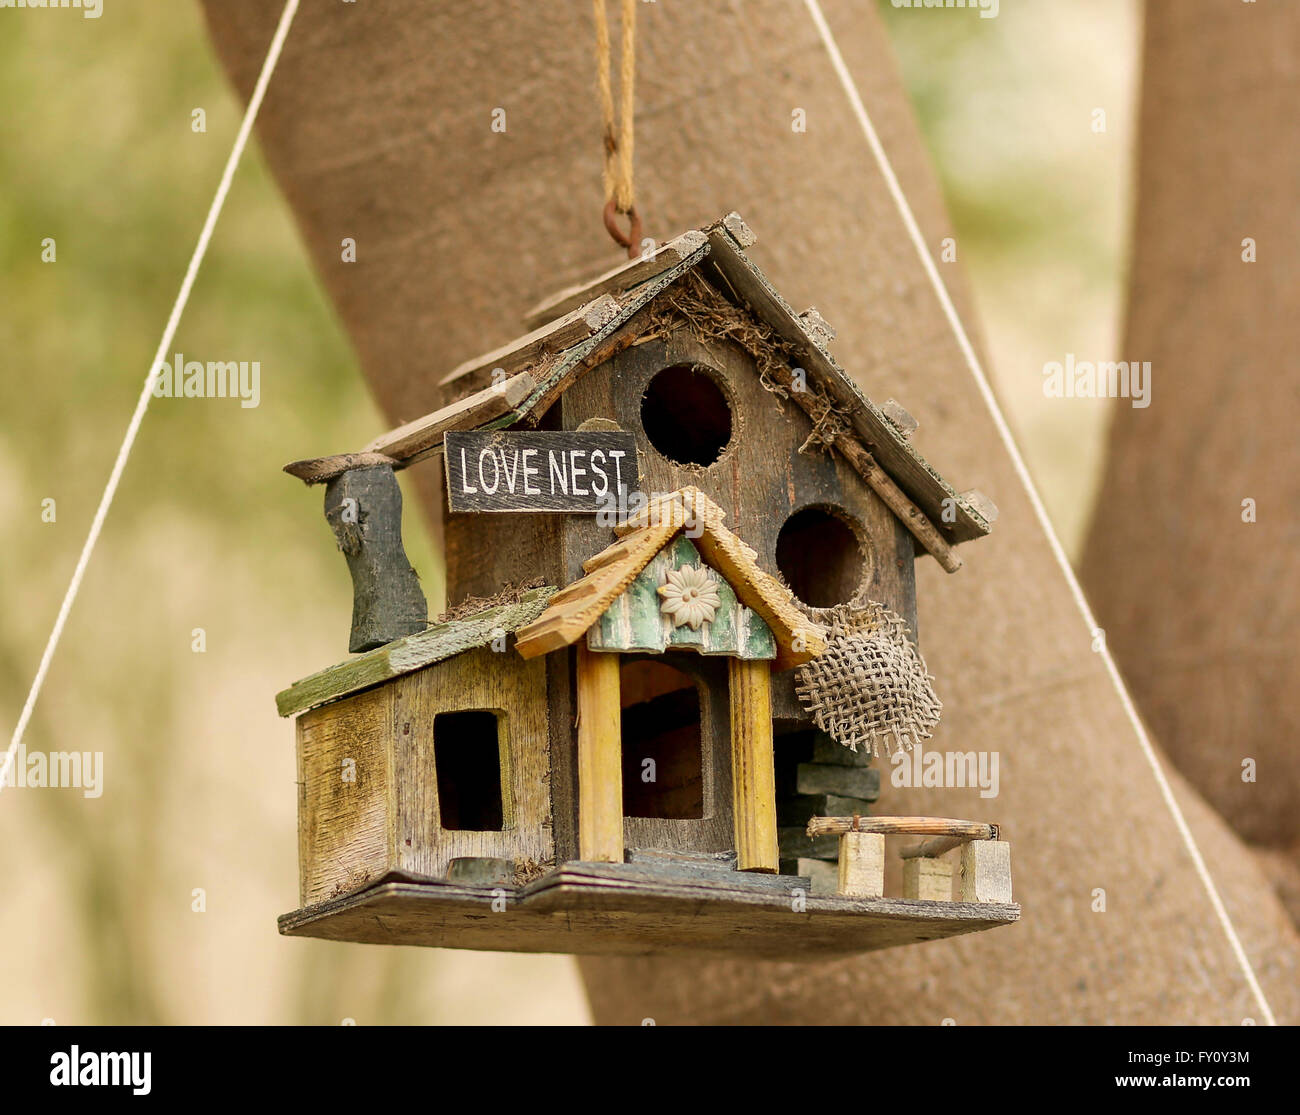 Nest, sweet nest. Really awesome home for birds, nice decoration for your garden Stock Photo